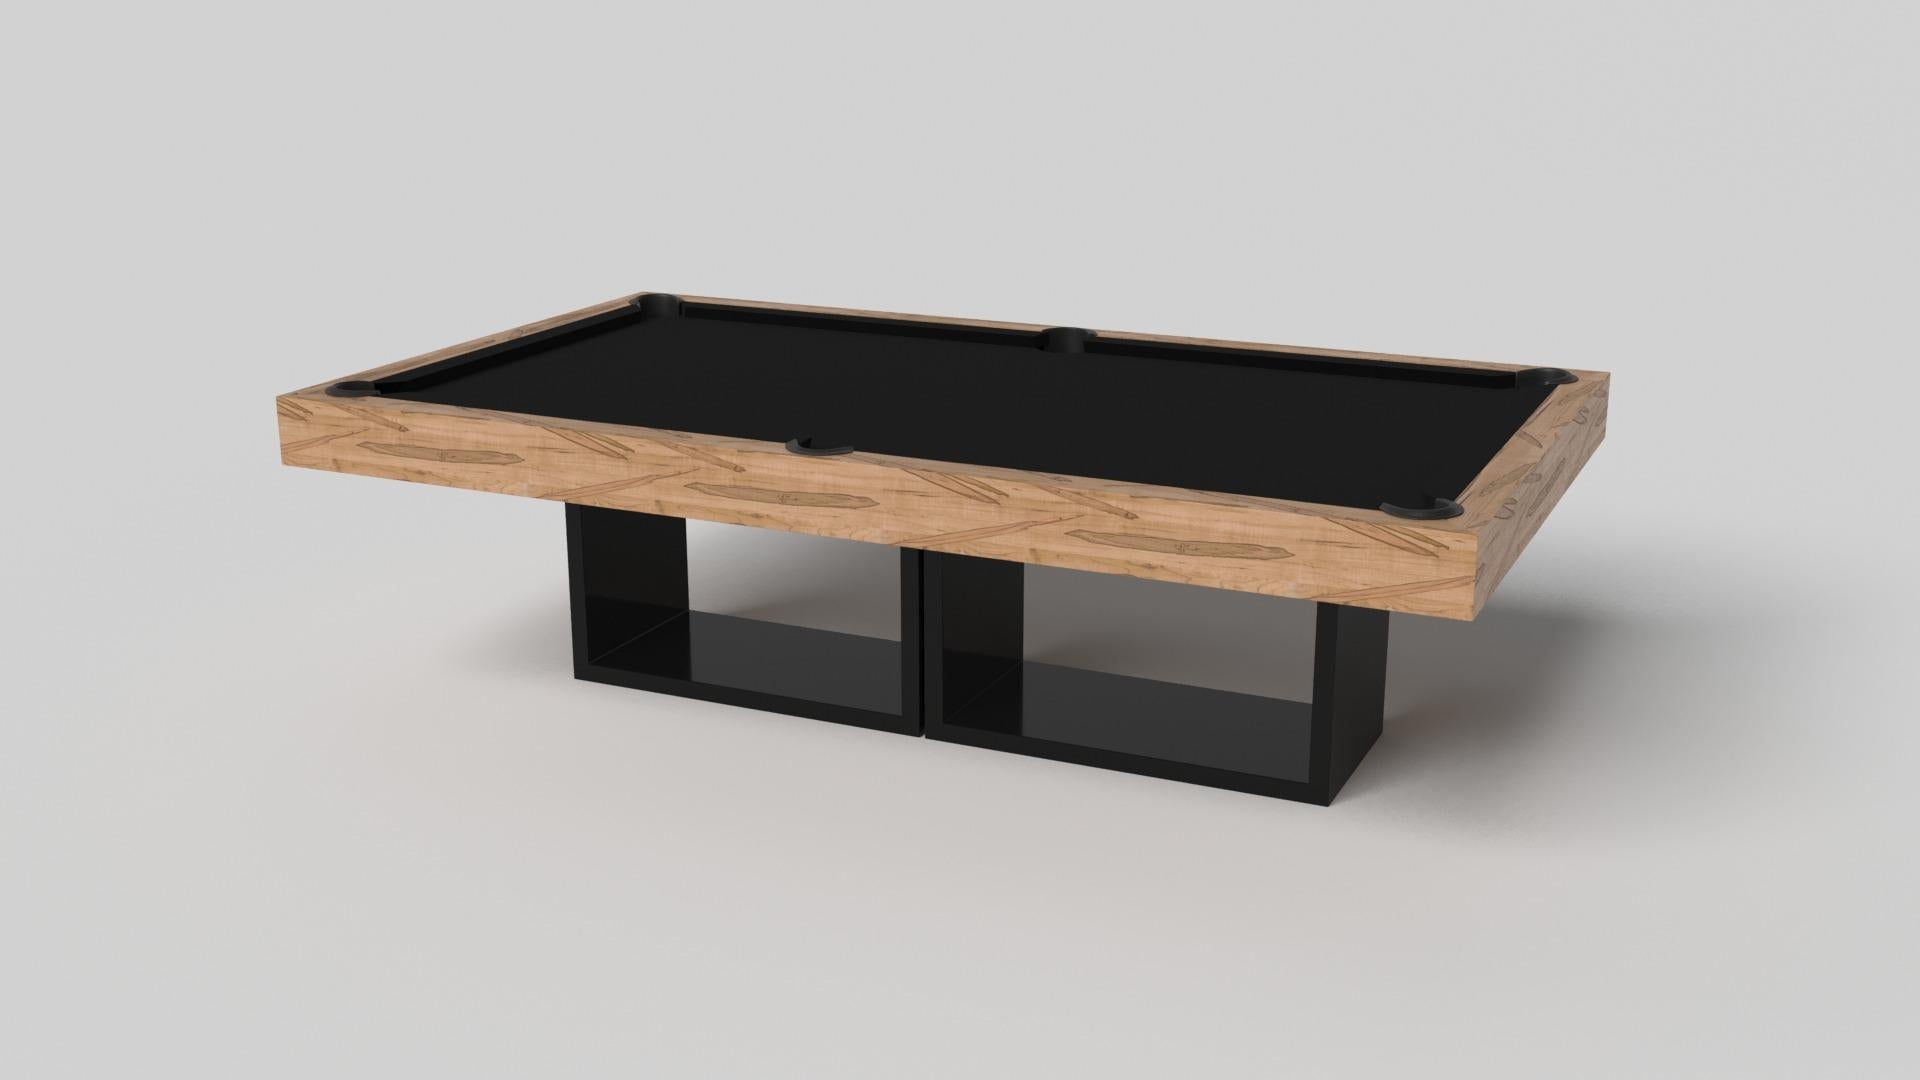 Supported by two rectangular open pedestals as the base, this handcrafted pool table is modern and minimalistic with its combination of simple, geometric forms. Viewed from the front, the use of negative space is evident; viewed from the side, the